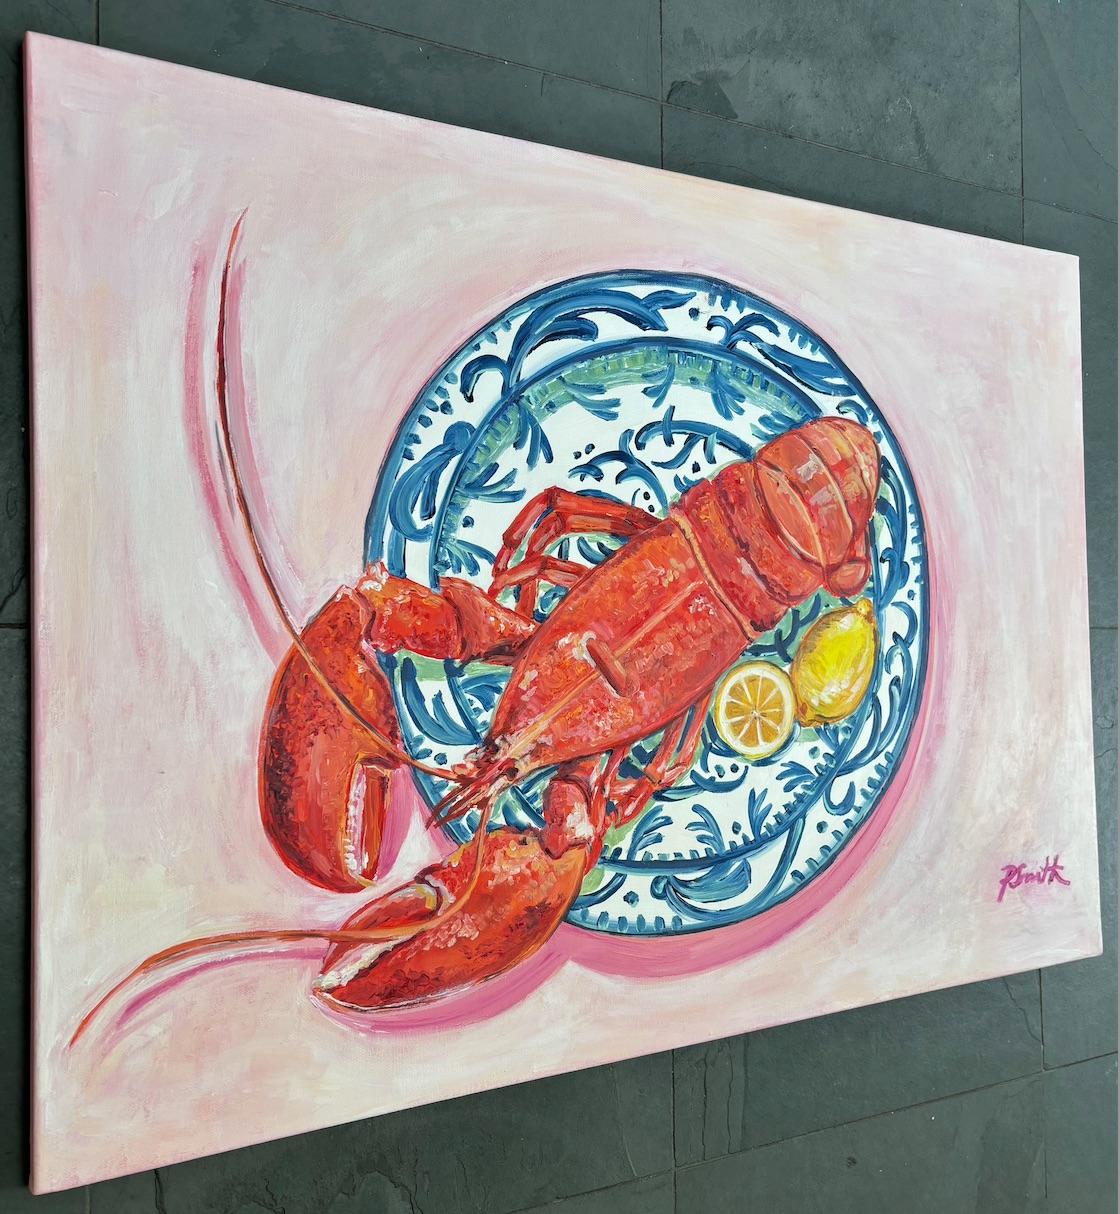 This vibrant and contemporary still-life painting depicts a fresh and juicy lobster with a lemon on a traditional Hispanic blue and white ceramic plate. Playing with a larger than life scale, this pice is both impactful and playful. The softly pink